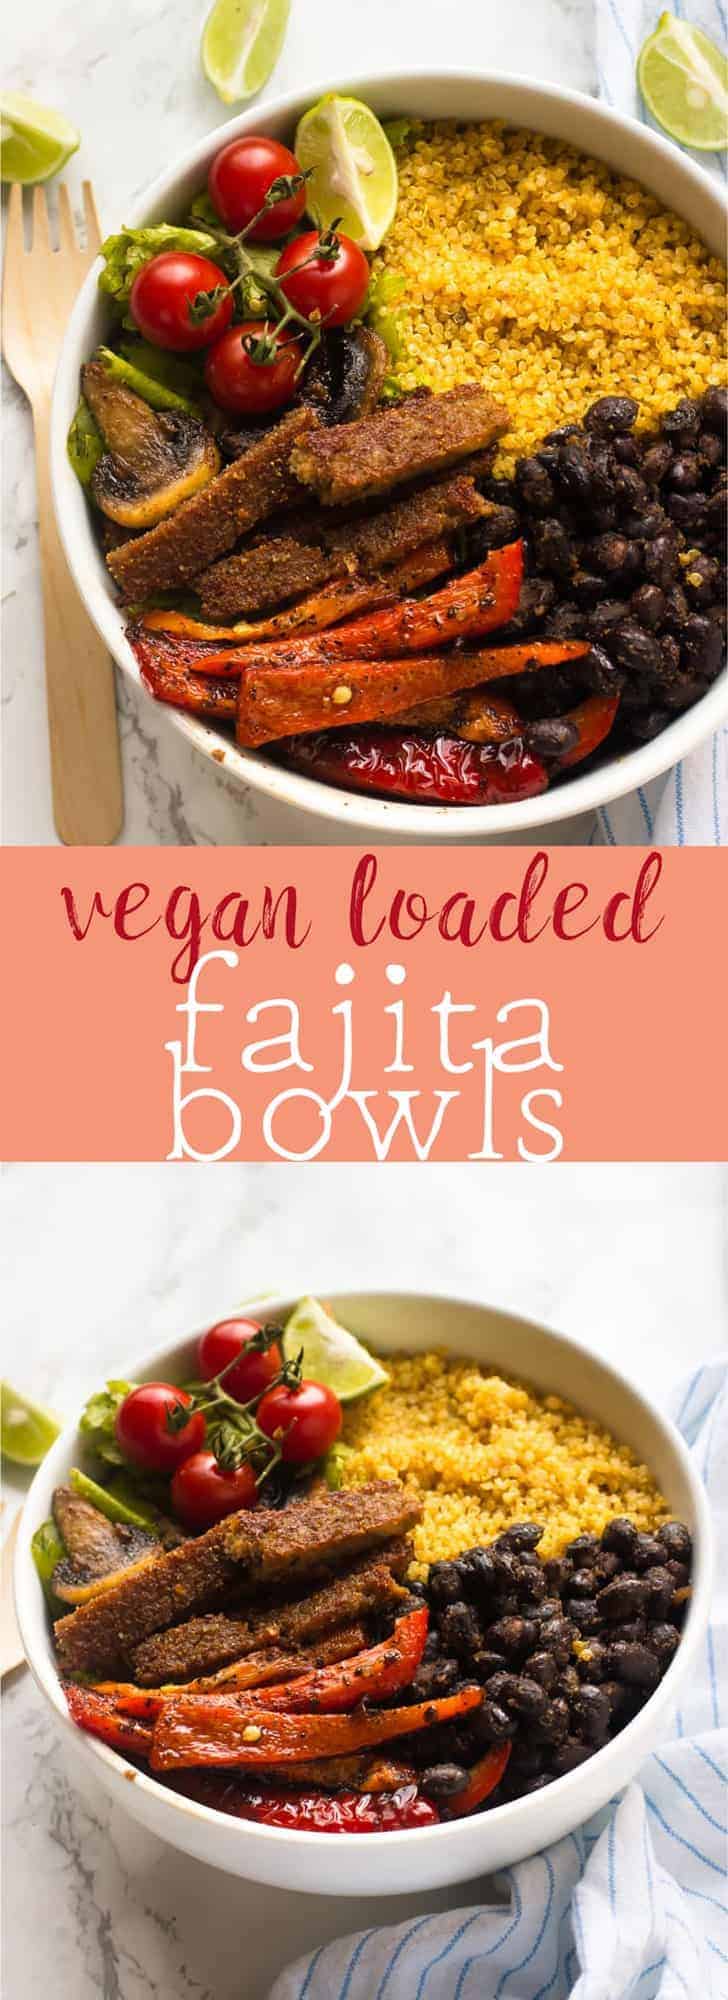 These Vegan Fajita Bowls are loaded with all your favourite fajita toppings, protein-filled and done in just 30 minutes! via https://jessicainthekitchen.com